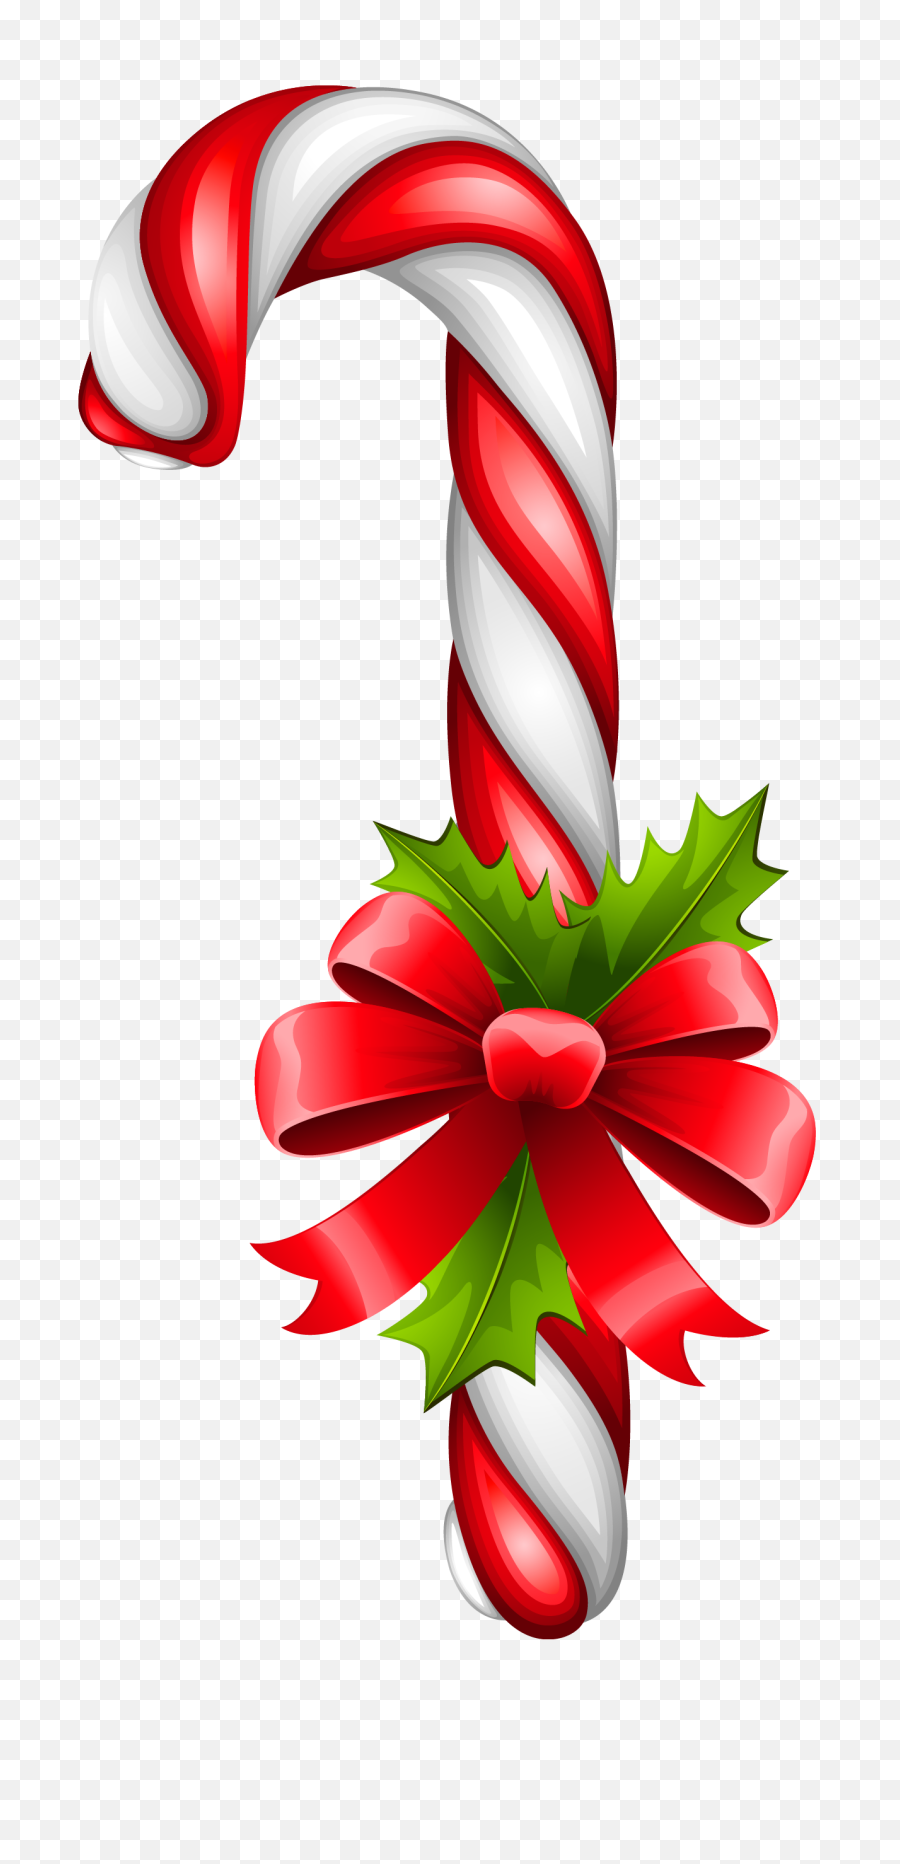 Download Hd Christmas Candy Cane - Christmas Candy Cane Transparent Png,Cane Png